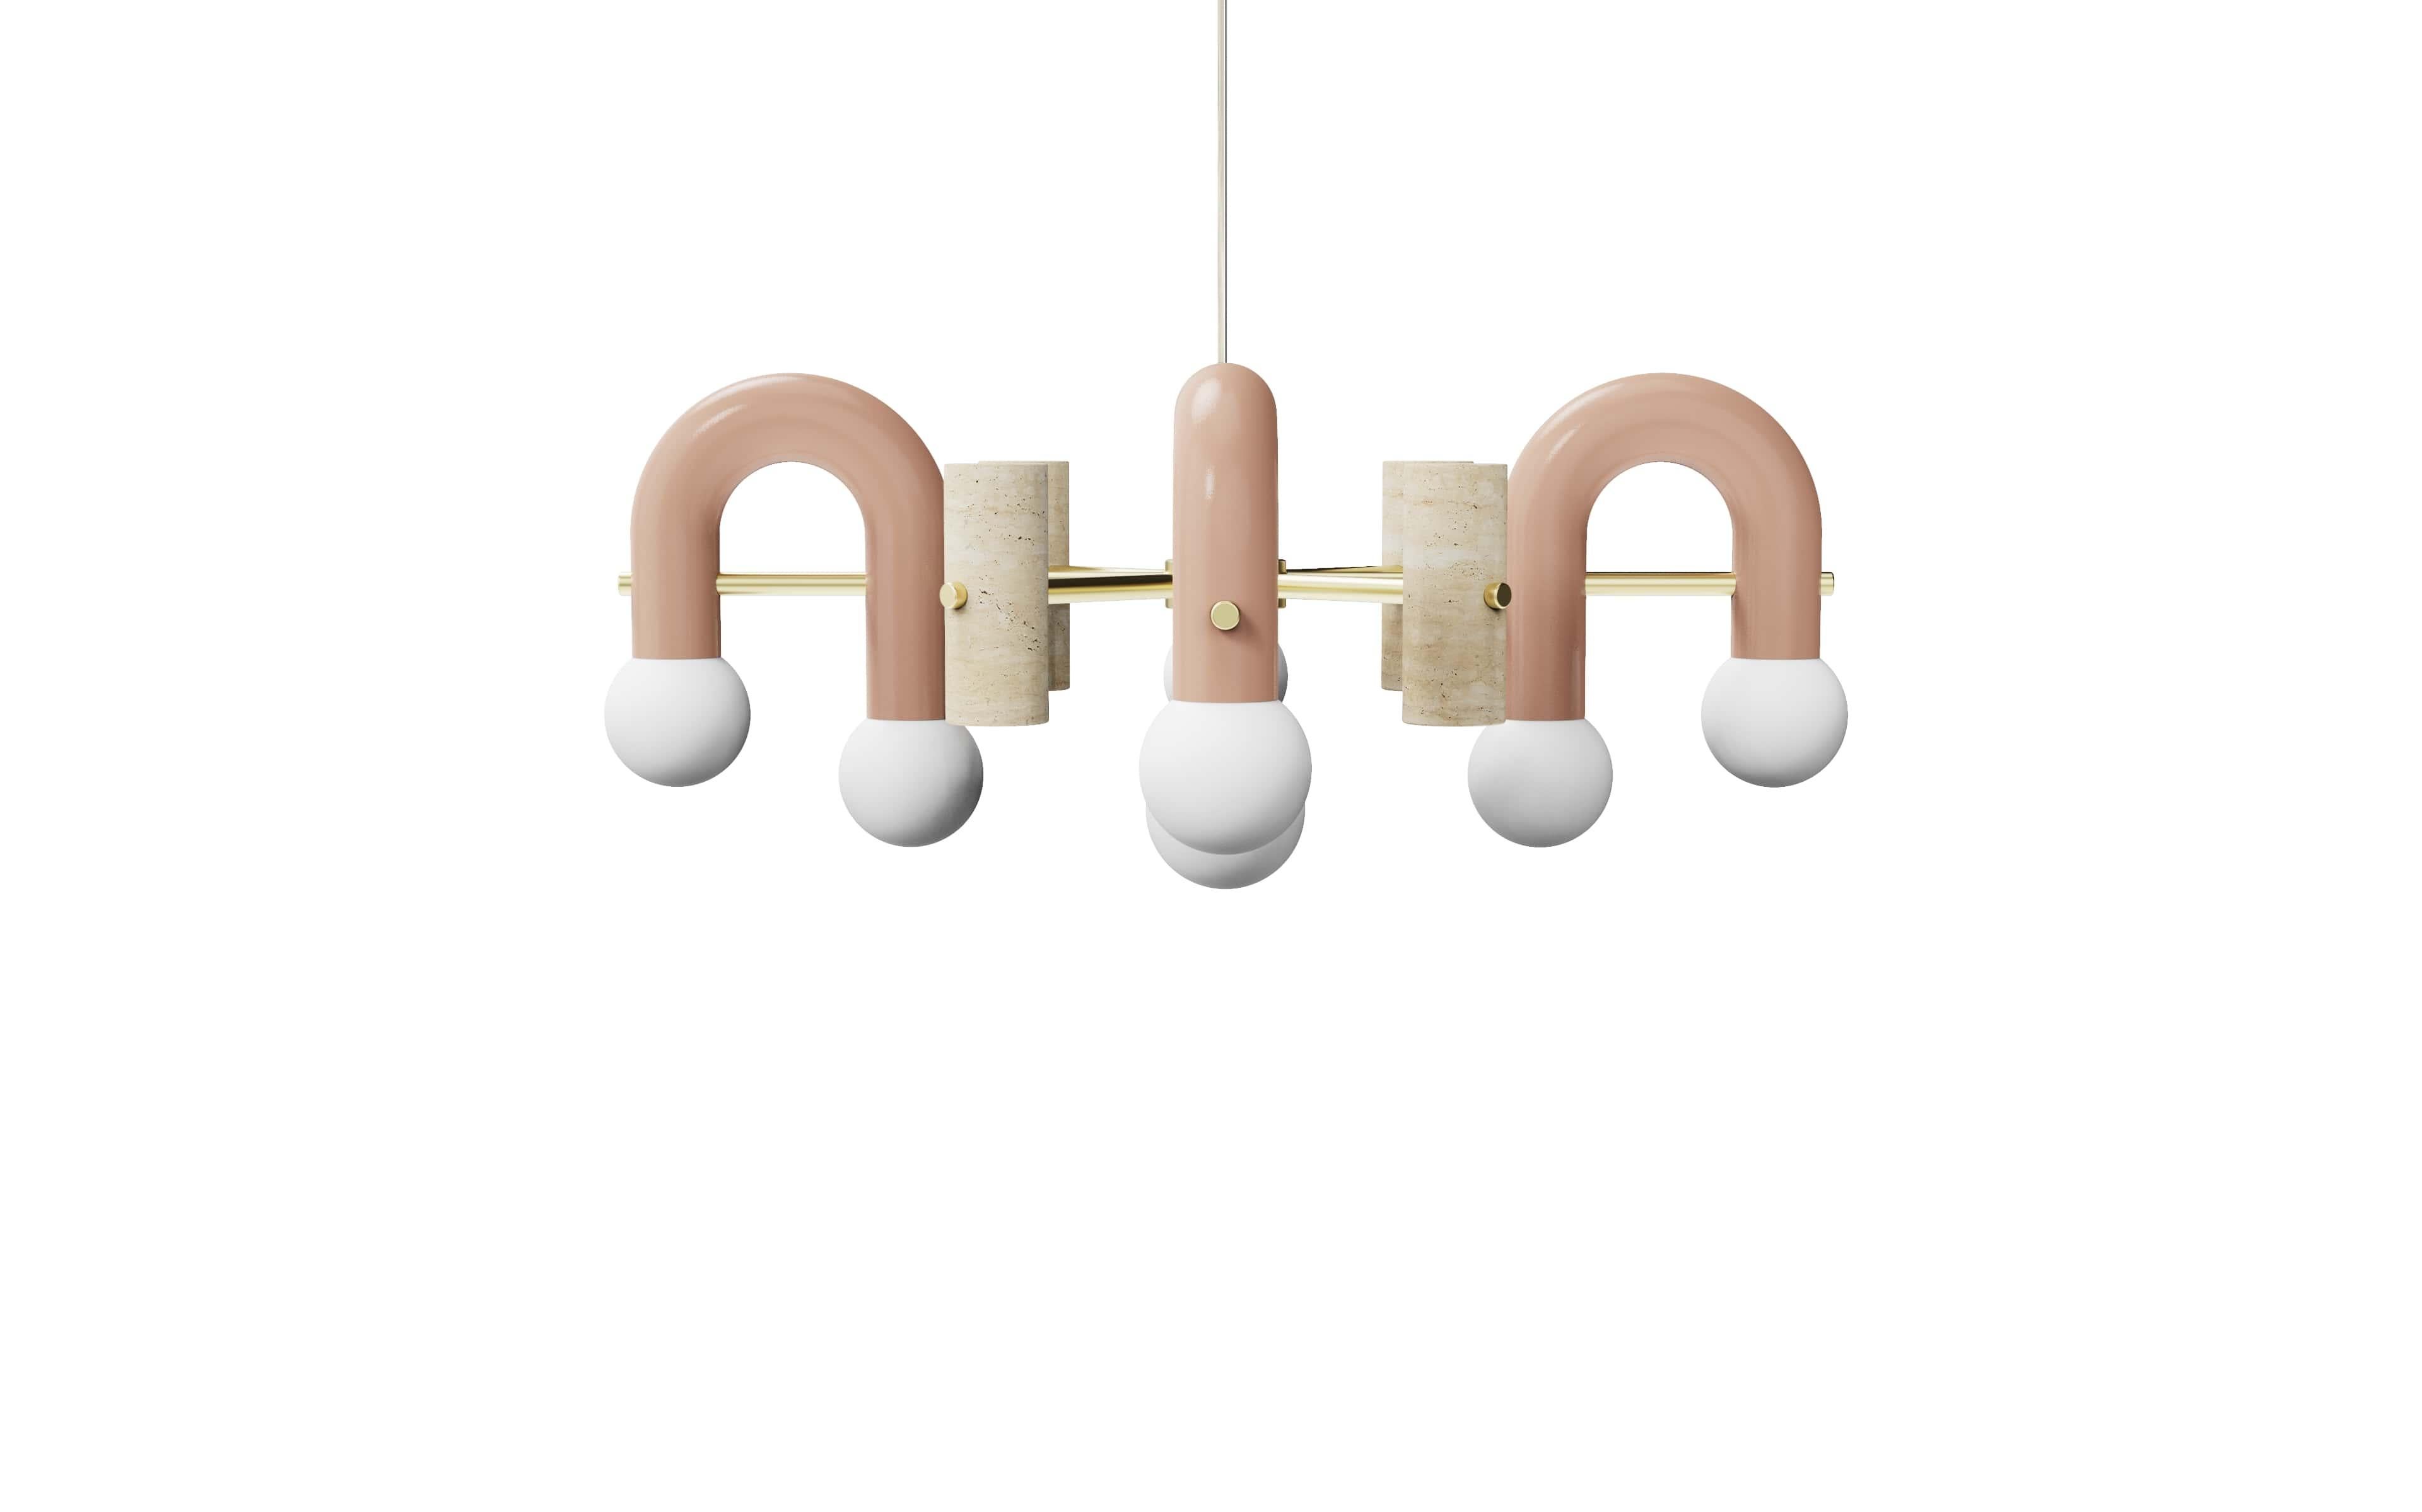 Pyppe flat suspension lamp by Utu Lamps
Dimensions: W 92 x D 12 x H 36 cm
Materials: Lacquered metal, brass/nickel, travertine

All our lamps can be wired according to each country. If sold to the USA it will be wired for the USA for instance.

Dooq